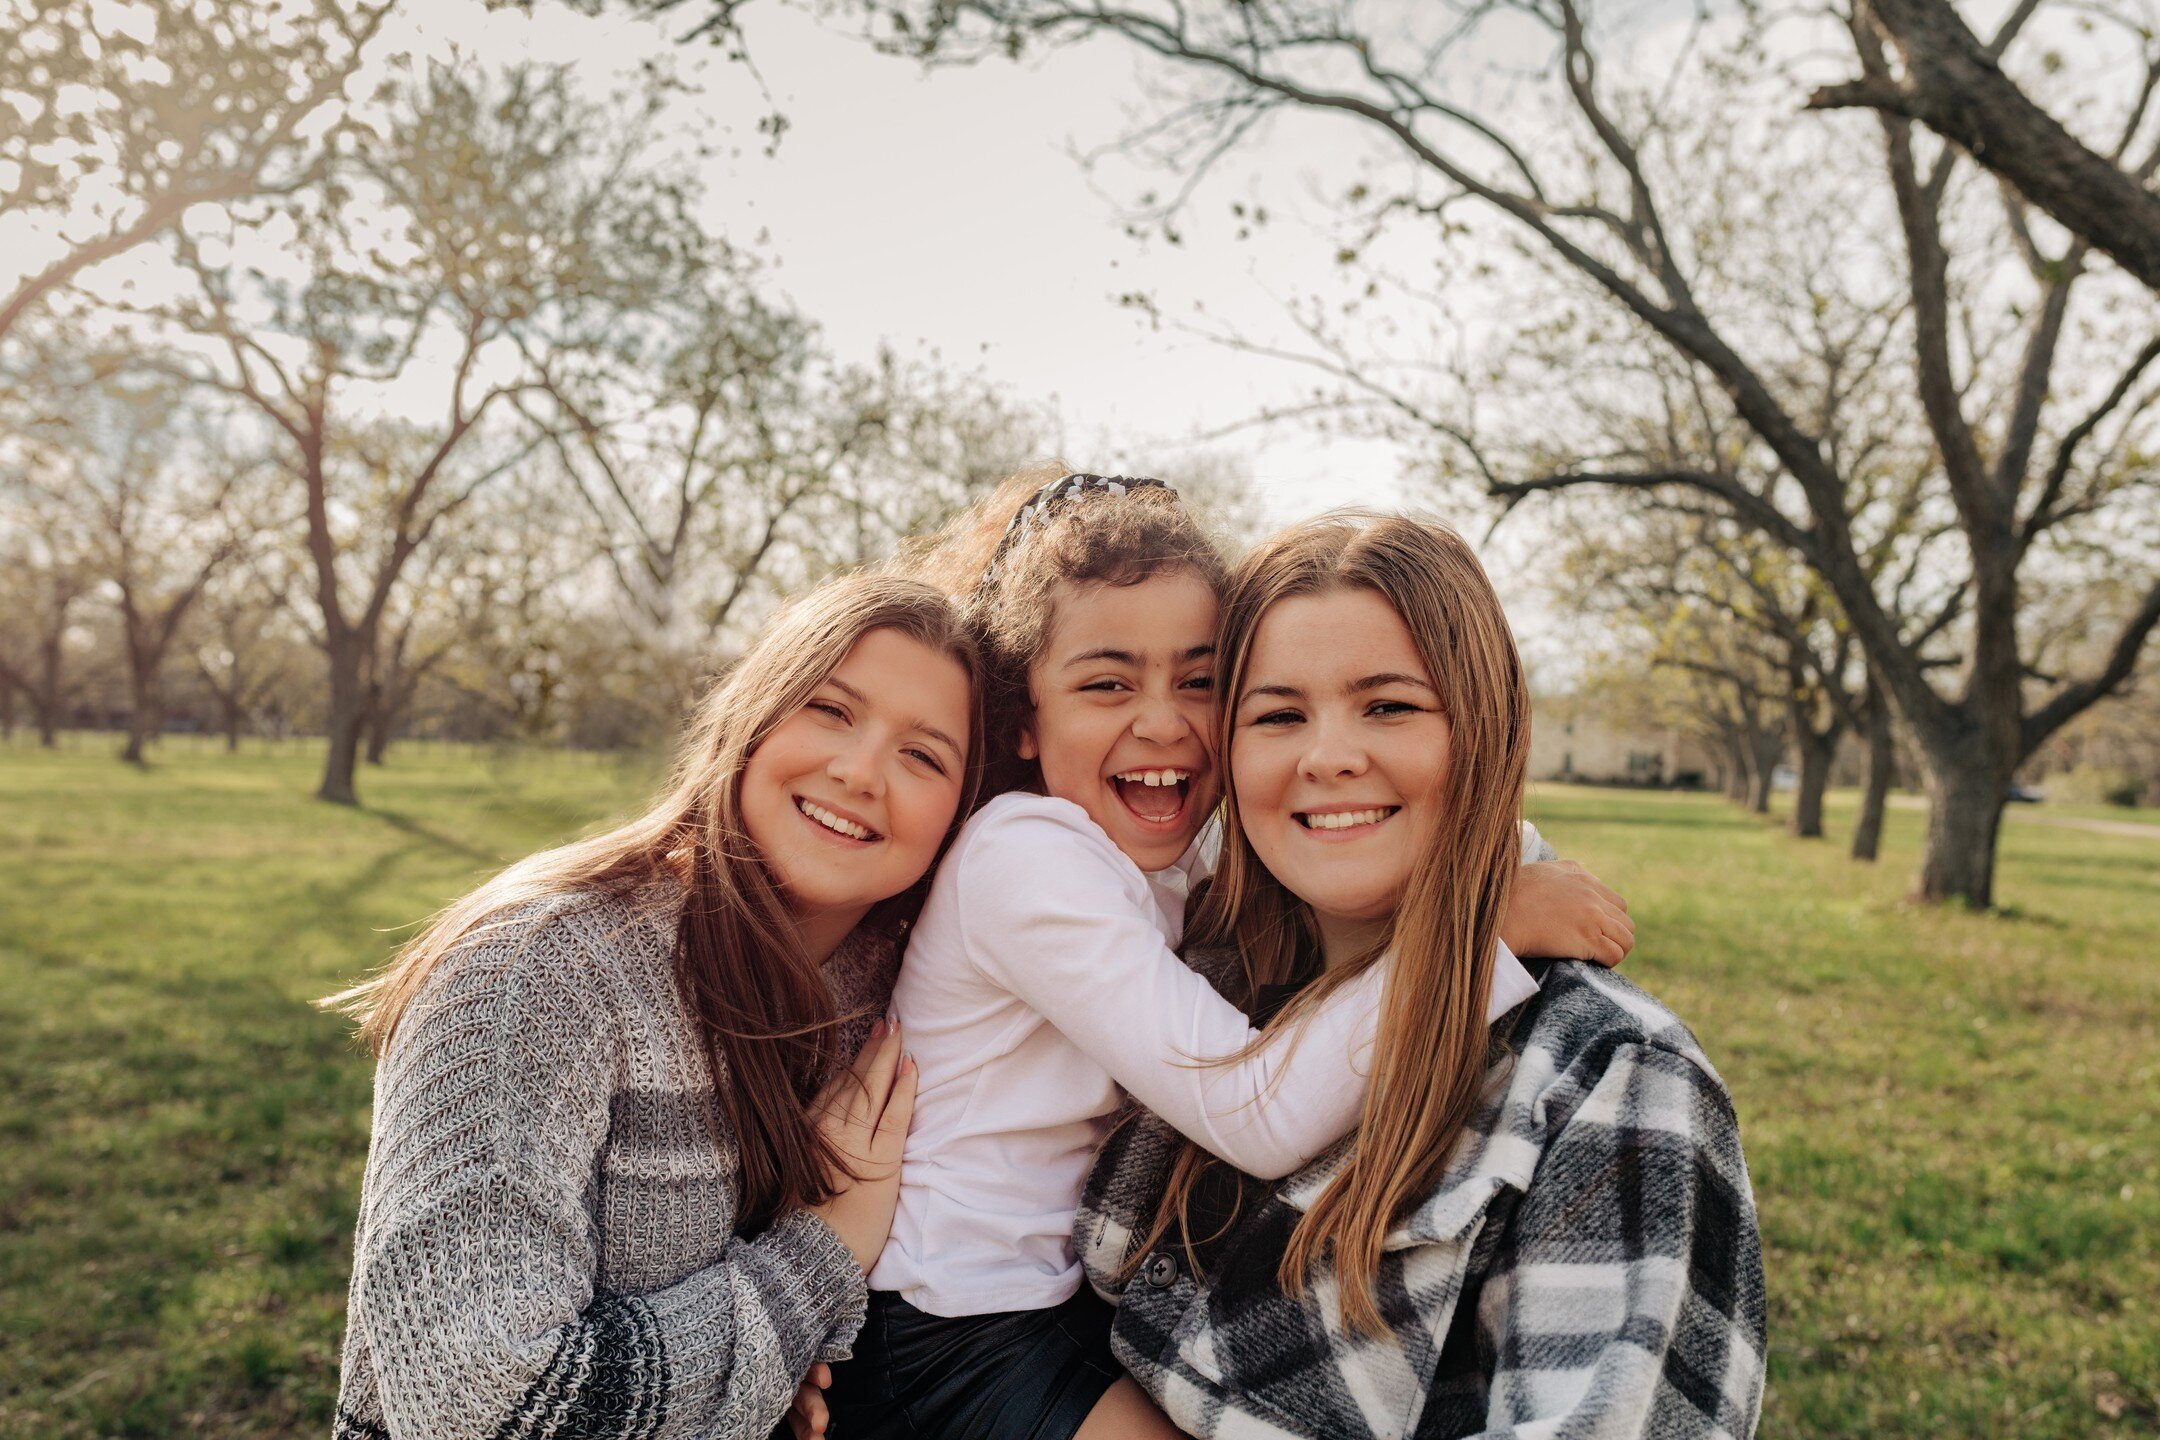 The sweet, protective bond these 3 sisters have for each other, is today's feel good moment ❤️ #thursdayvibes #InstaGood #Moment #visualsoflife #shotwithlove #familyforever #siblinglove #sisters #pocket_sweetness #katytxphotographer #katytxfamilyphot